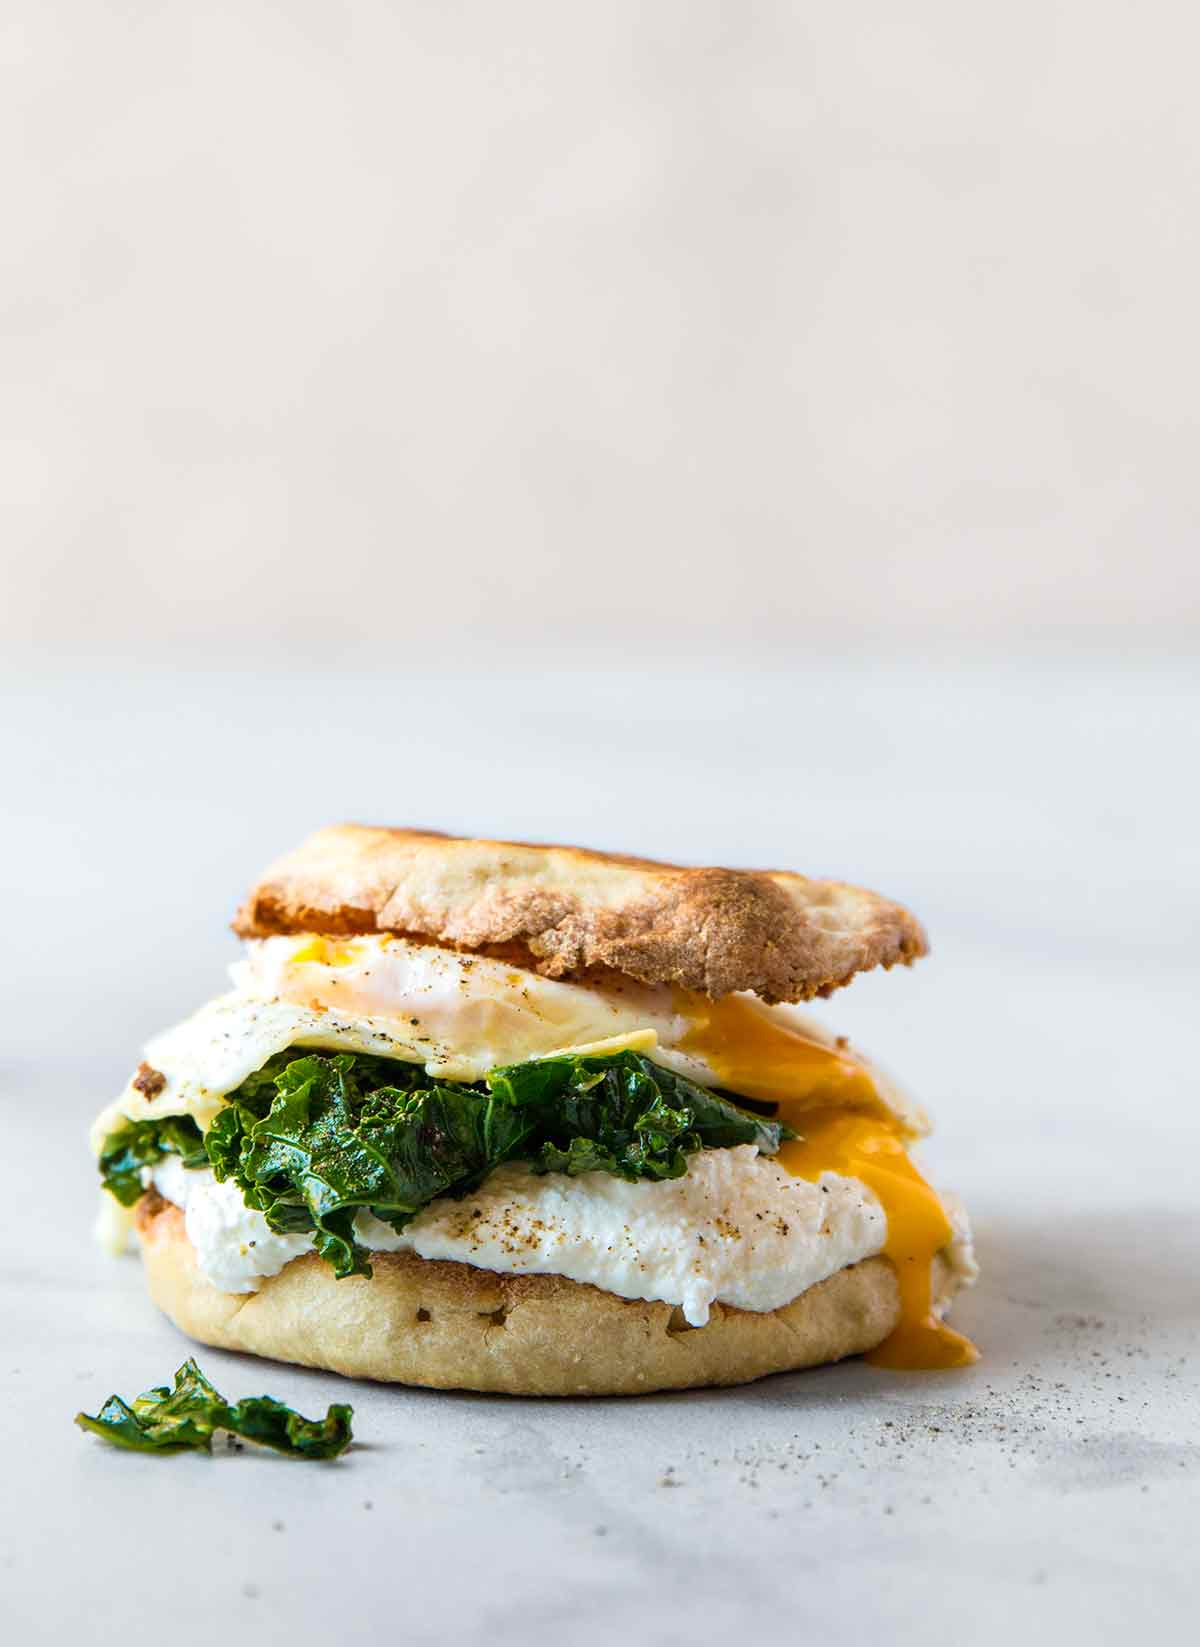 A fried egg, kale, and ricotta breakfast sandwich sandwiched between two toasted English muffin halves.